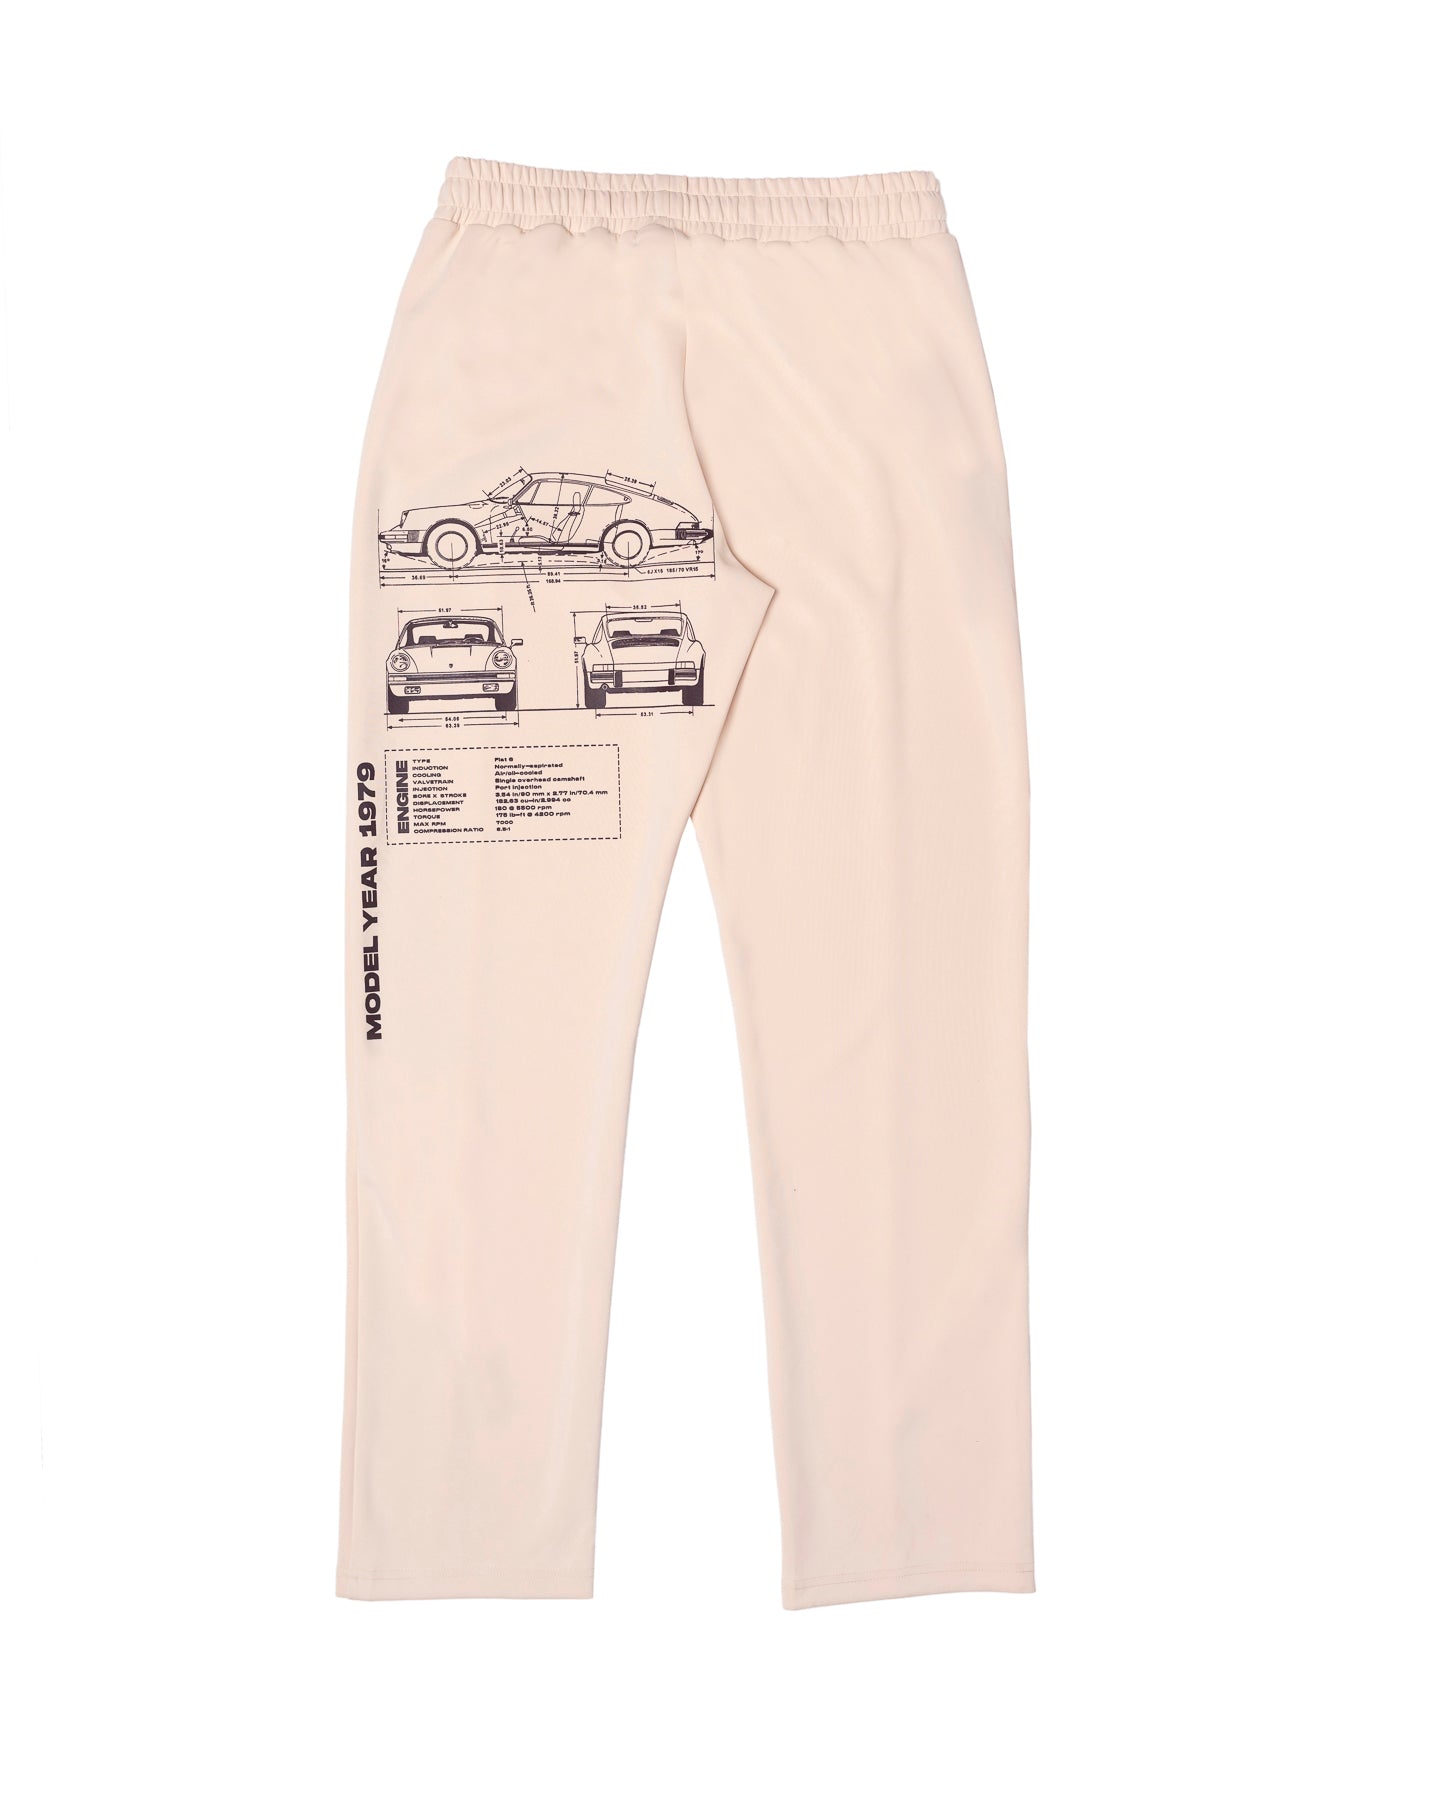 Horse Power -  Blueprint Trackpants - INTL Collective - Horse Power Clothing